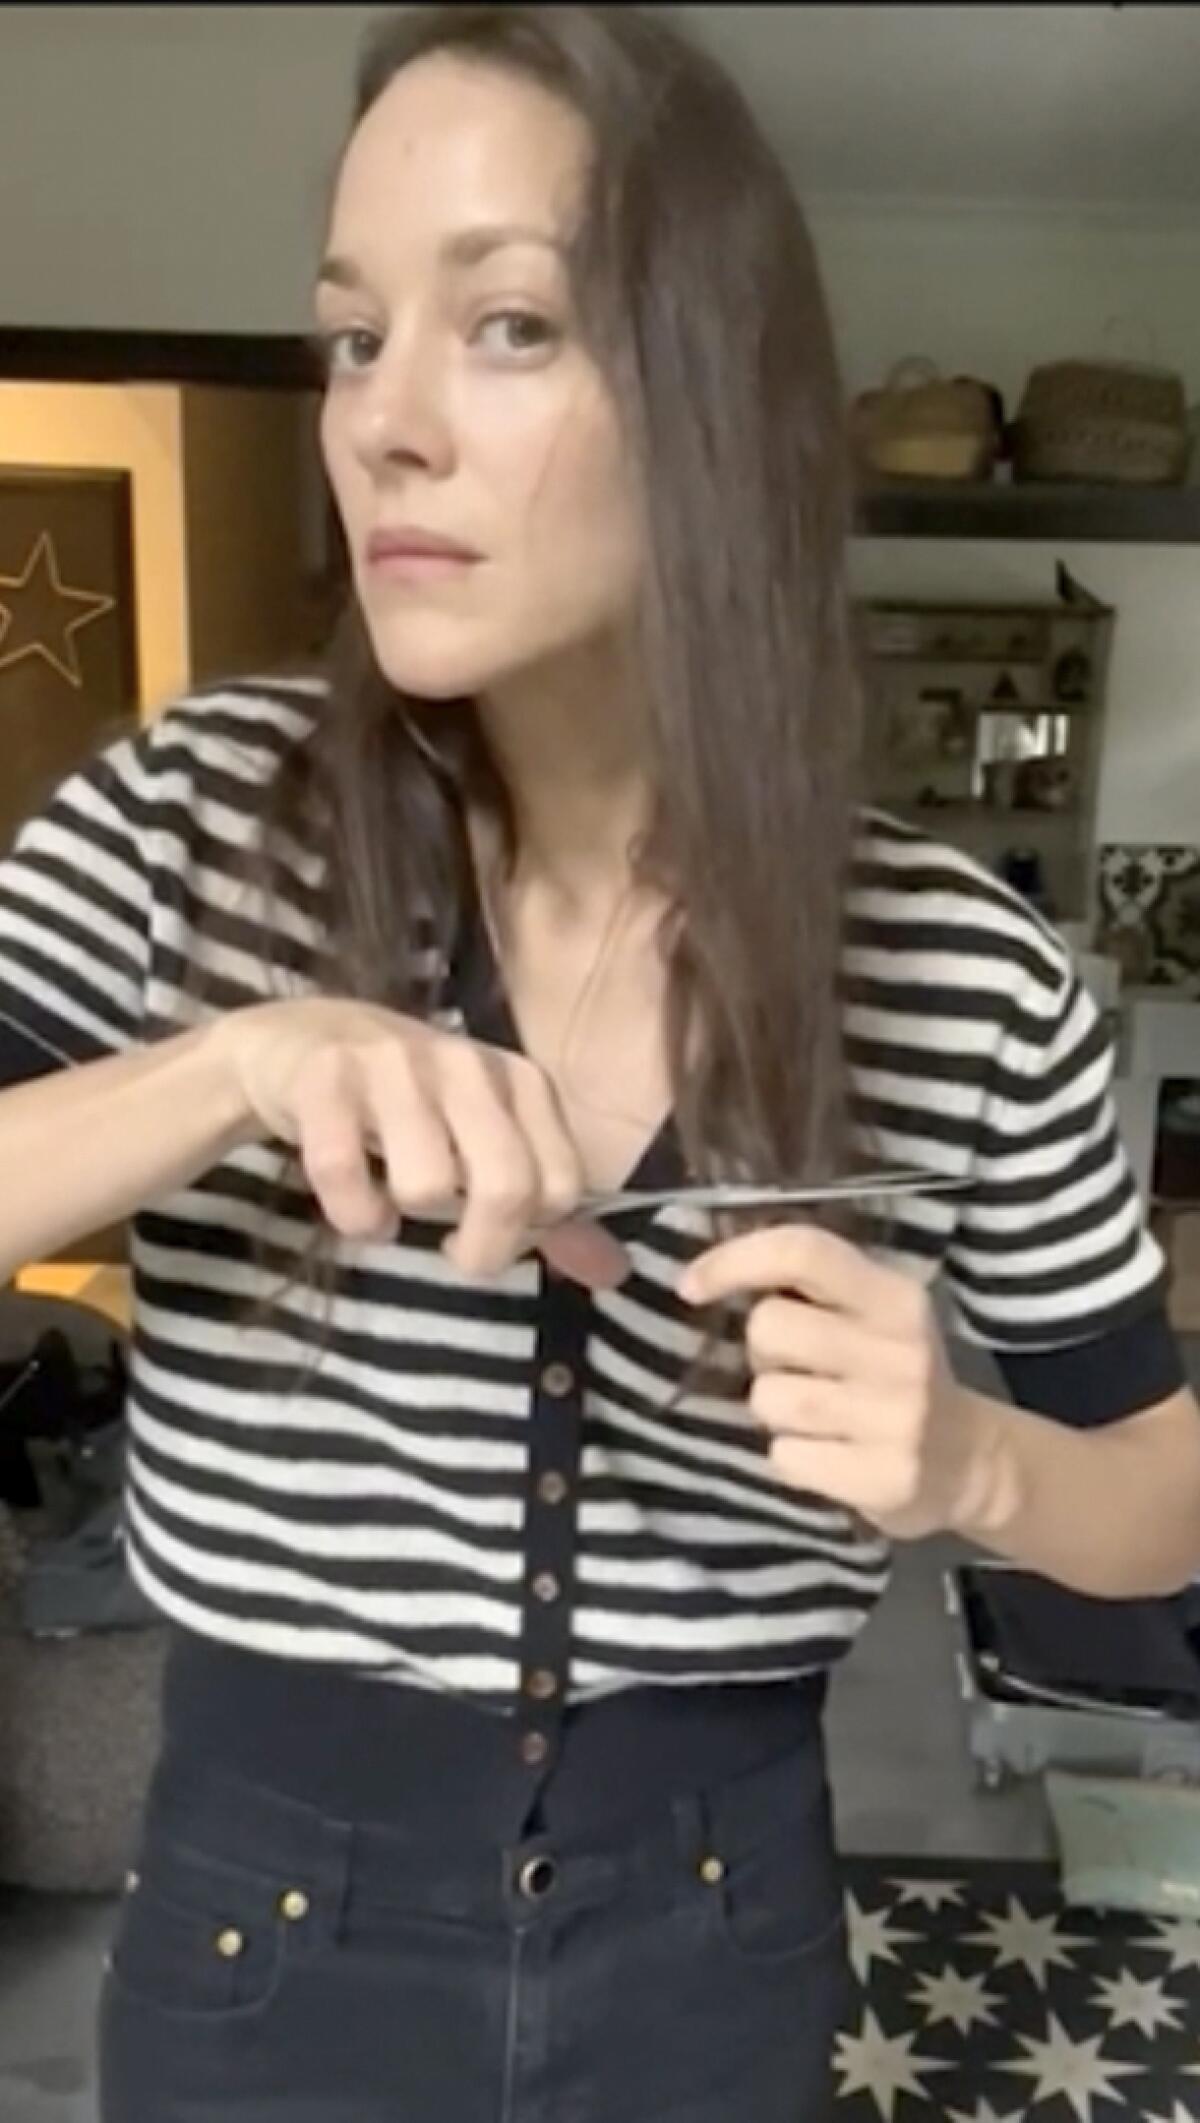 In this image taken from video, Oscar-winning actress Marion Cotillard chops off a lock of her hair to support Iranian protesters standing up to their leadership over the death of Mahsa Amini. Amini, a 22-year-old woman who died in Iran while in police custody, was arrested by Iran's morality police for allegedly violating its strictly-enforced dress code.